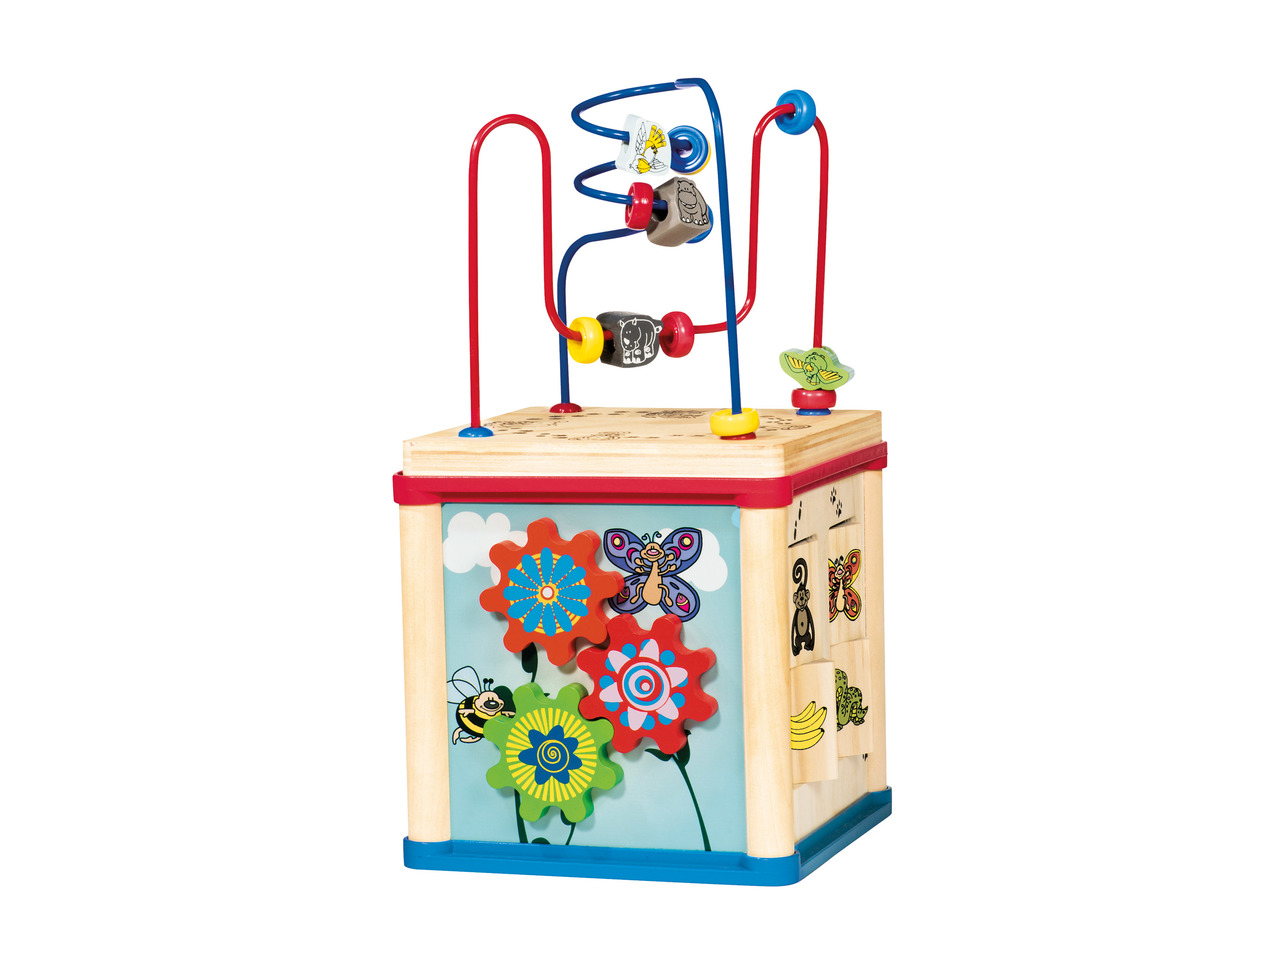 Playtive Junior Wooden Learning Toys1